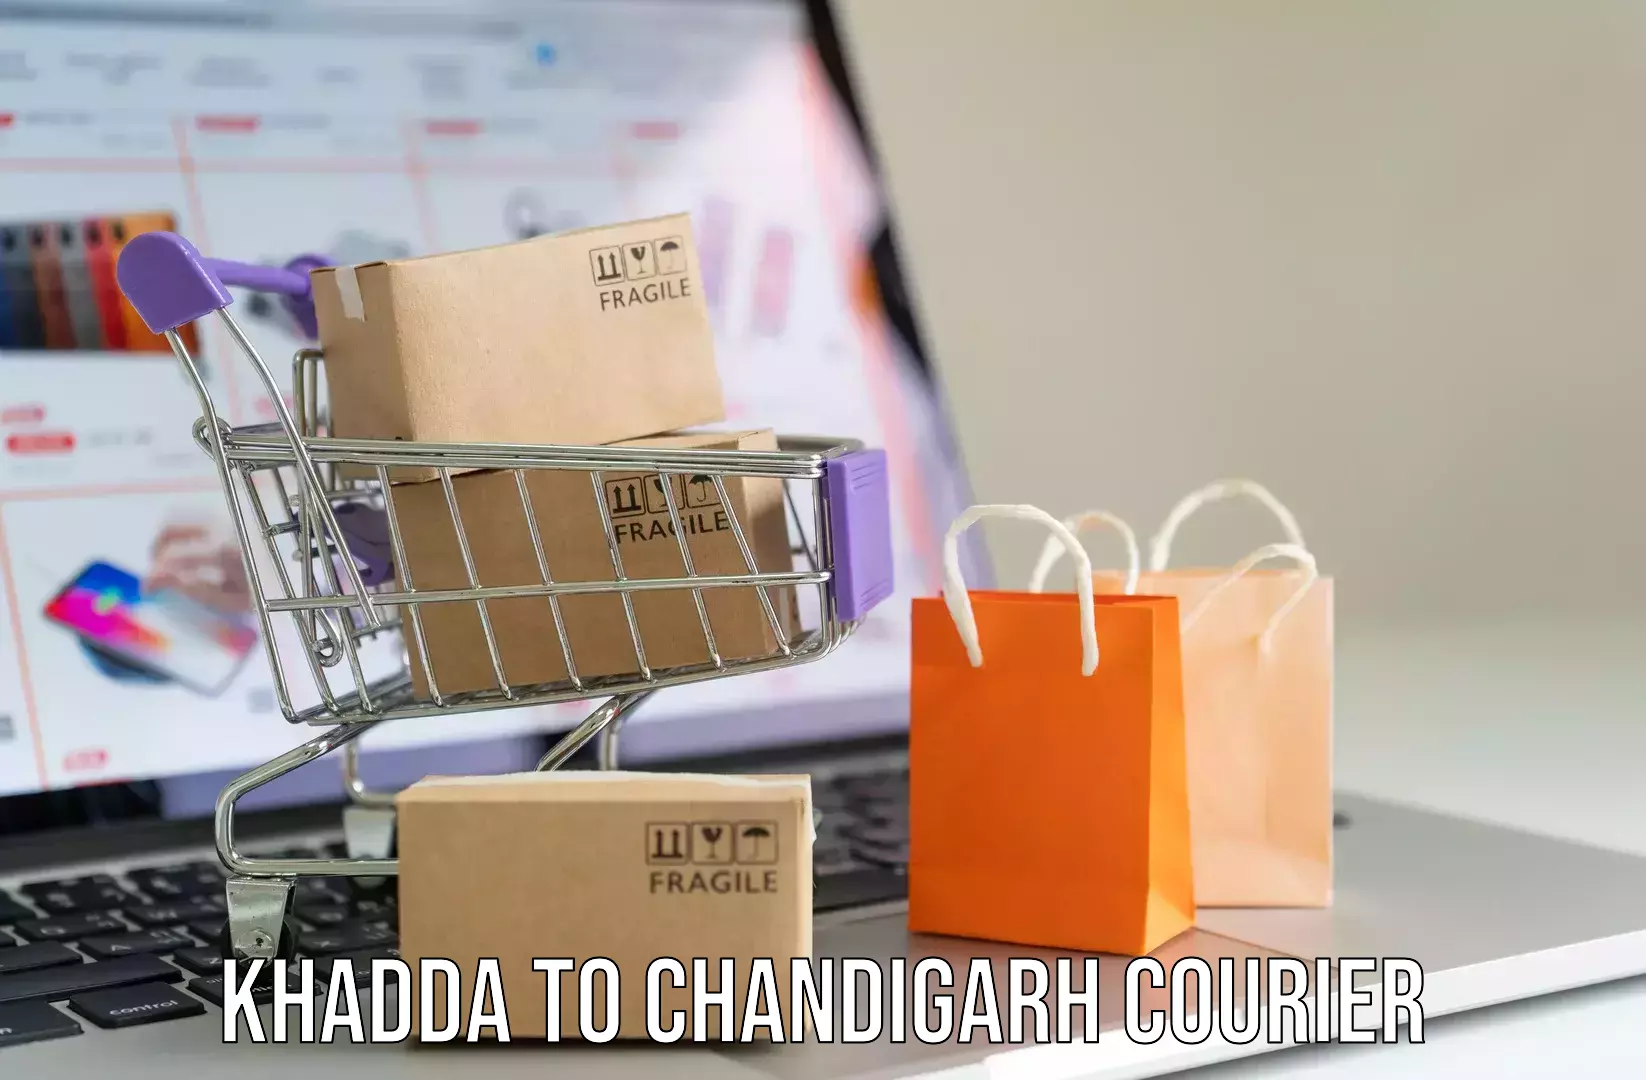 Luggage delivery app Khadda to Chandigarh